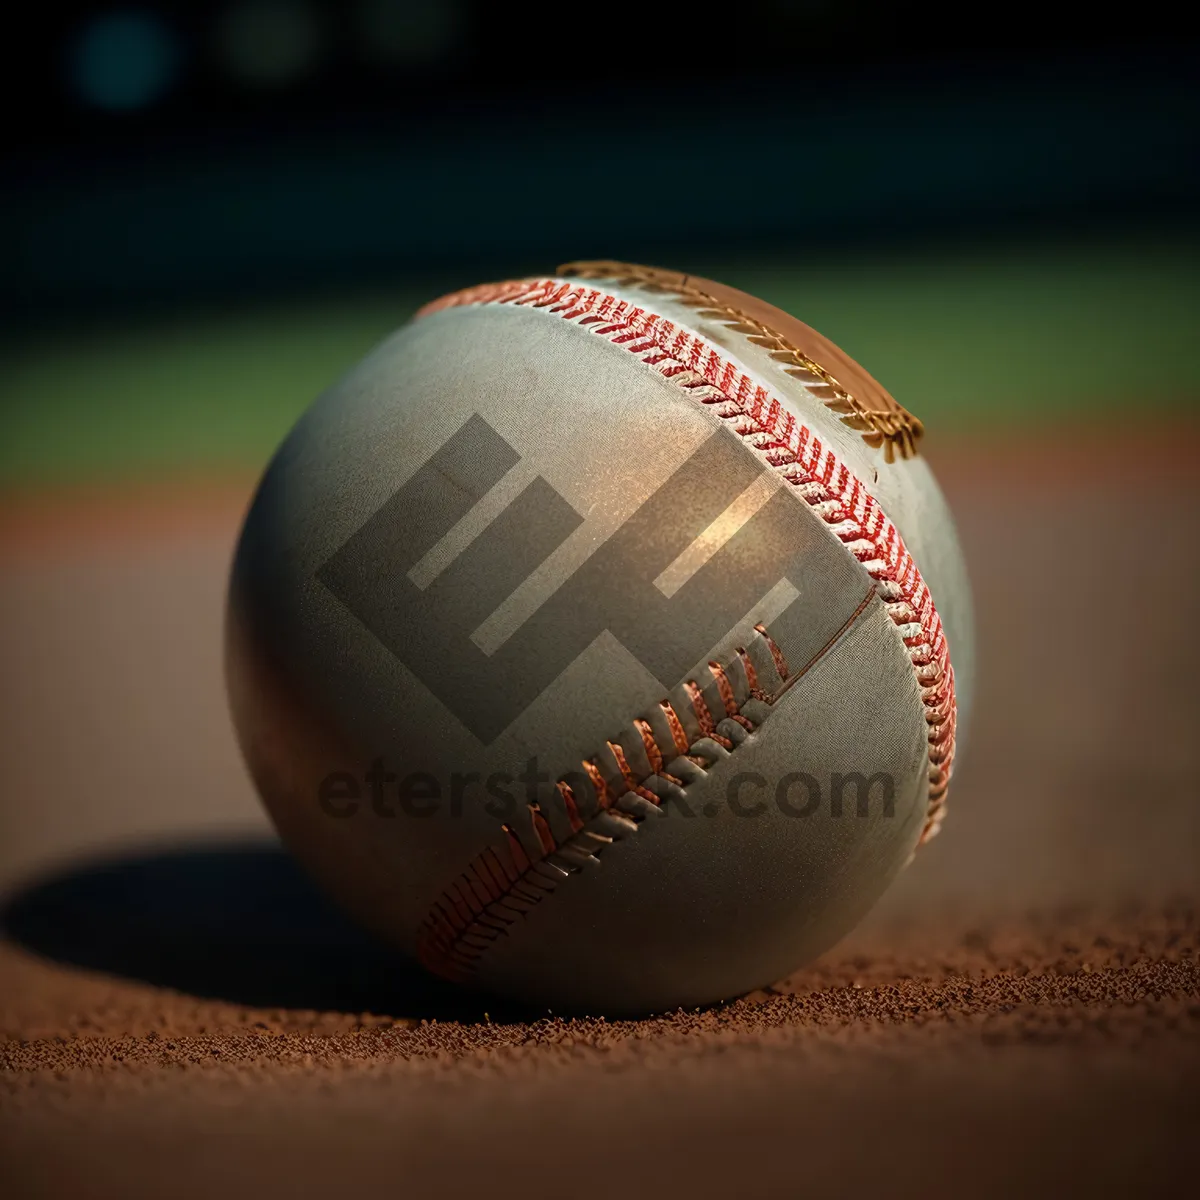 Picture of Baseball Equipment on Green Grass Field